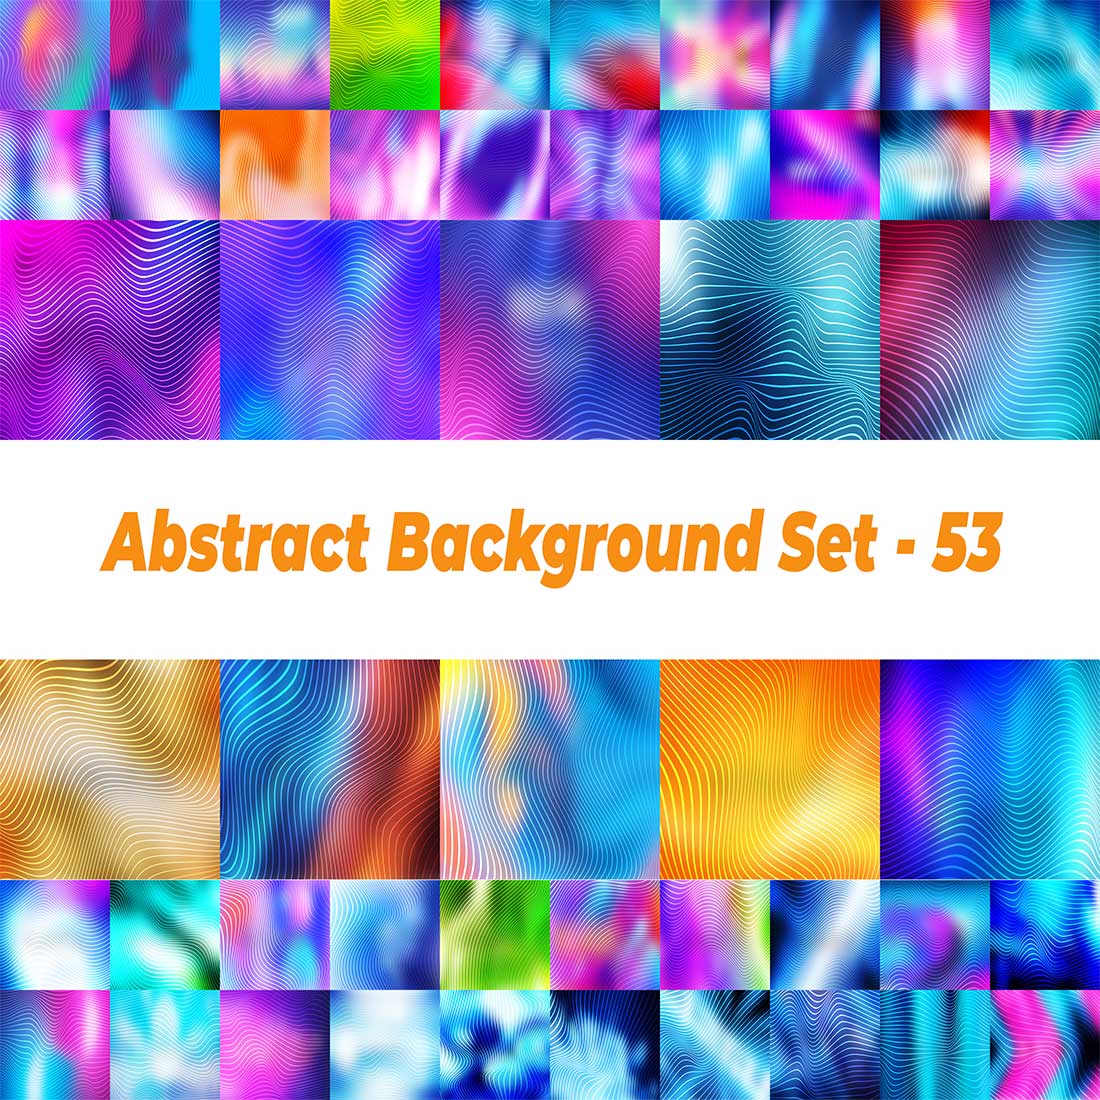 Abstract Wave Background Gradient Defocused Luxury Vivid Blurred Colorful Texture Wallpaper main cover.